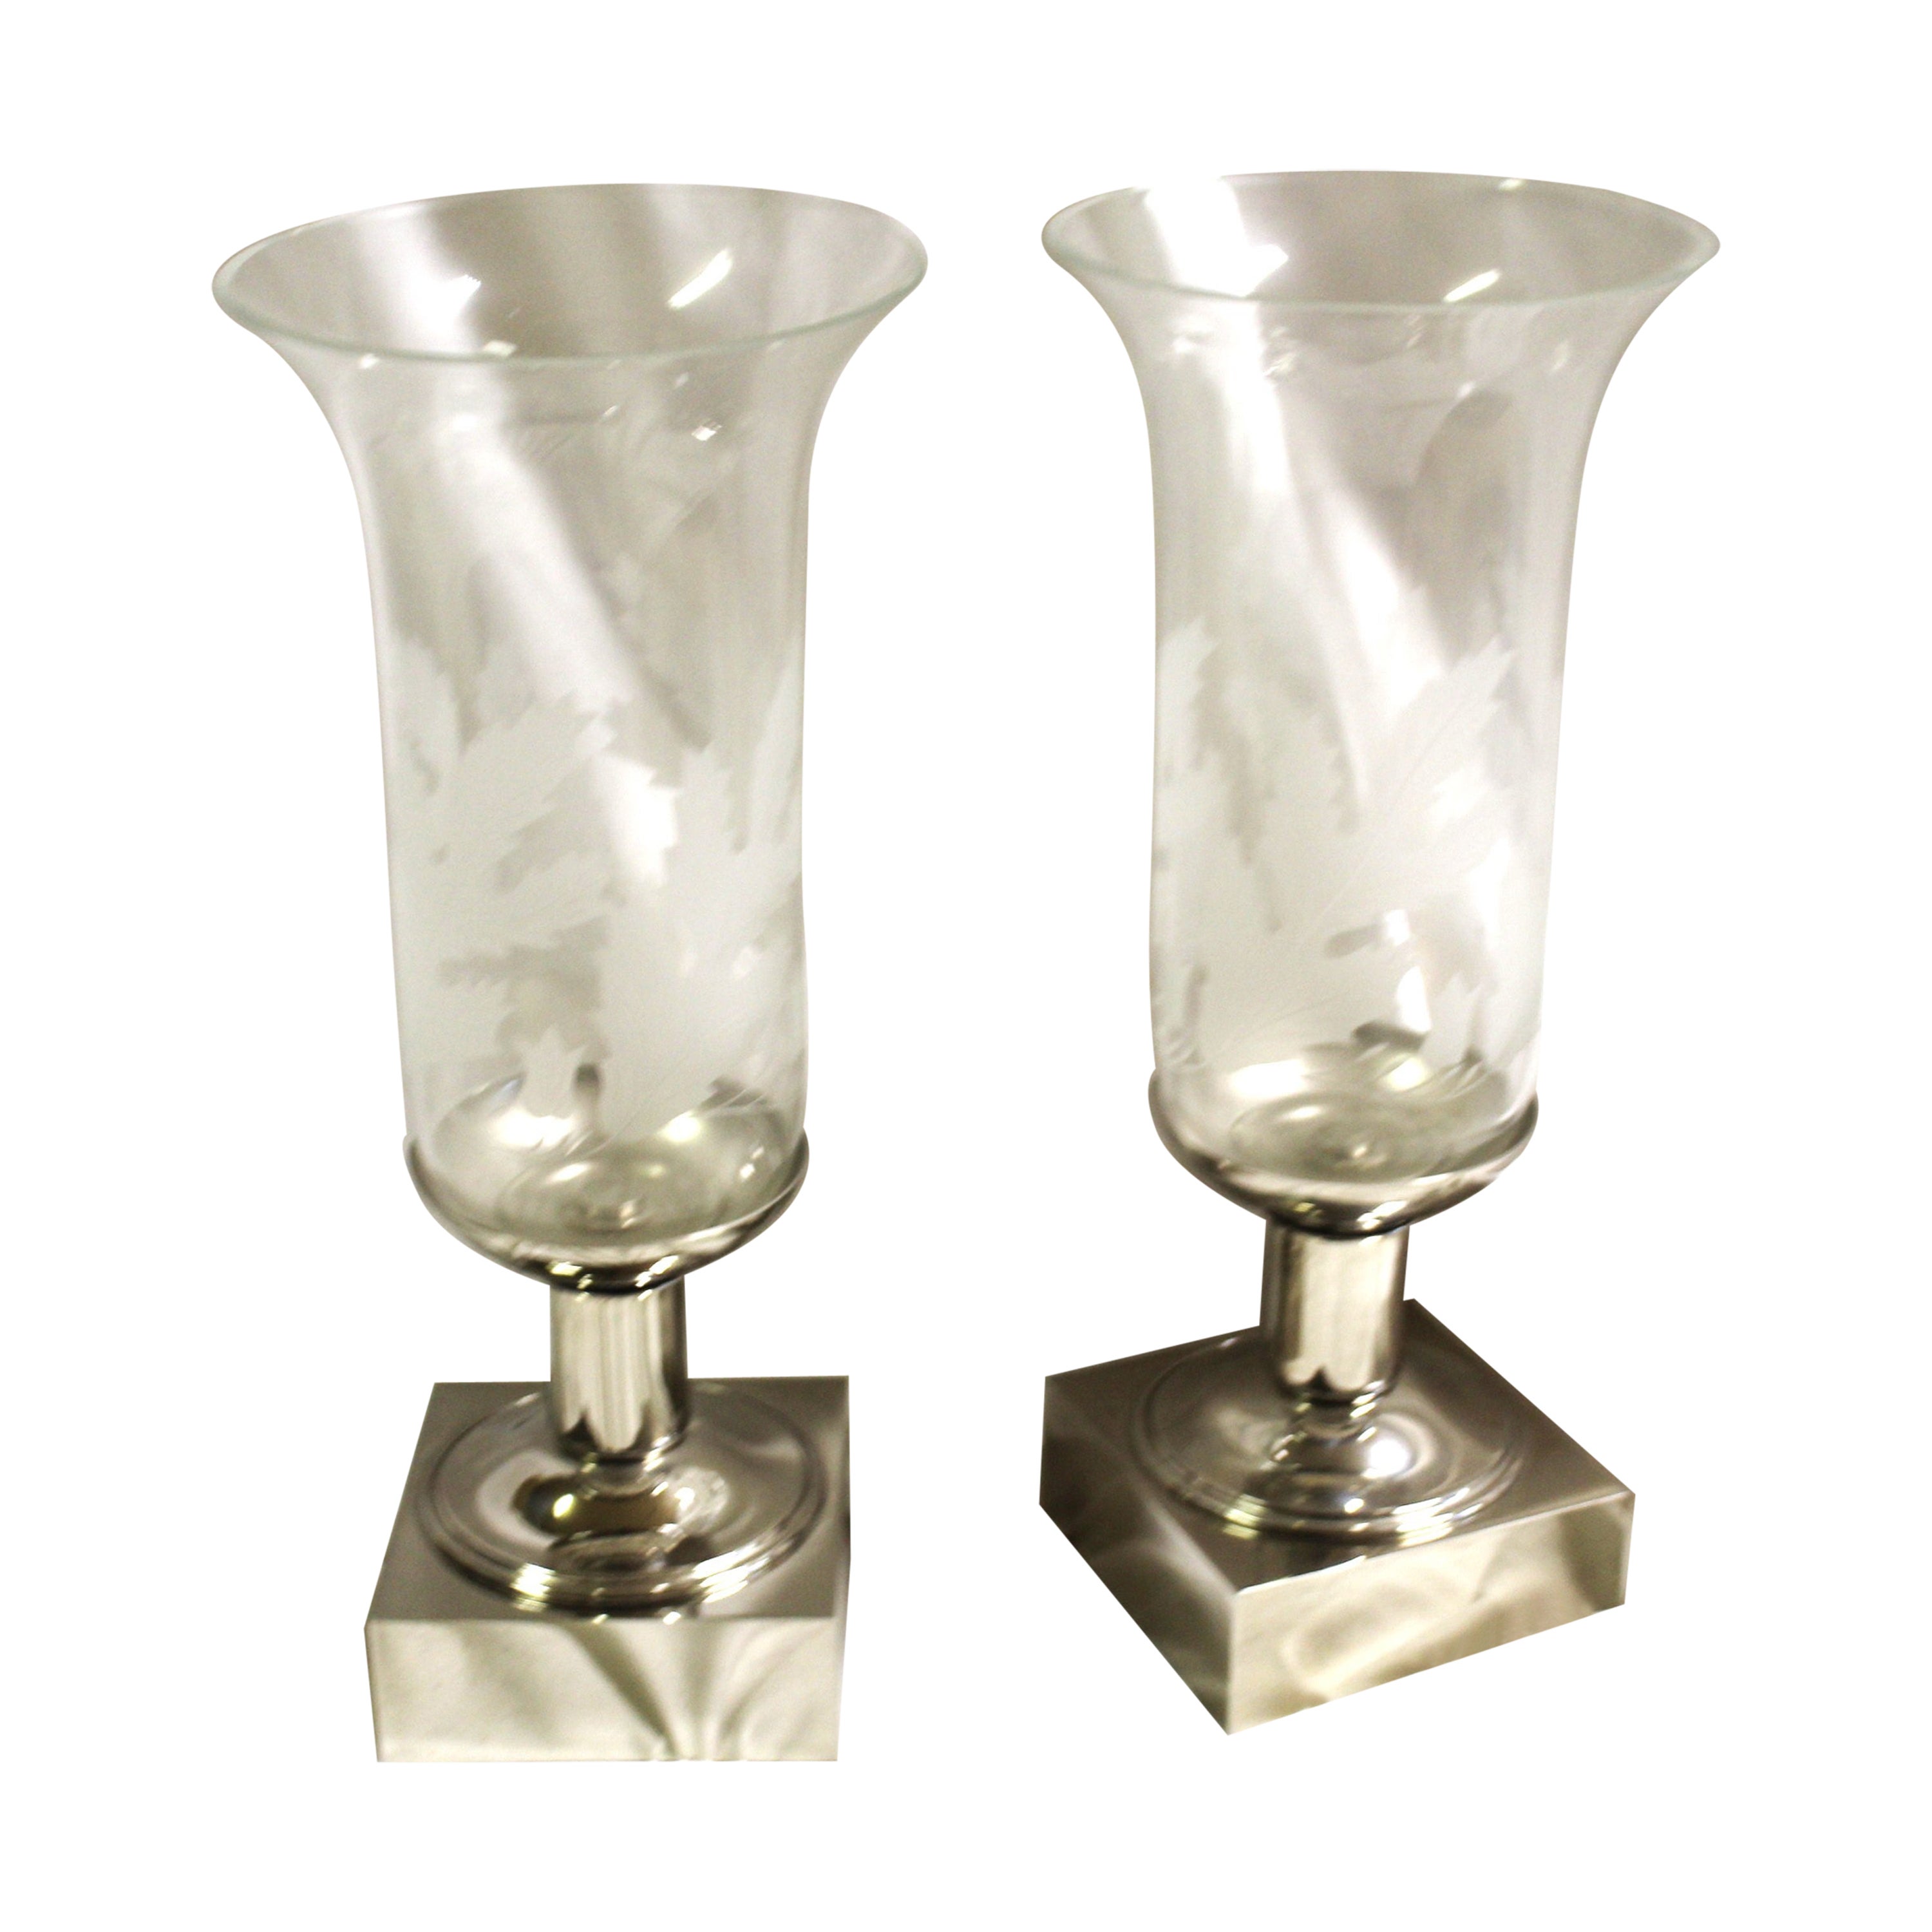 Early American style Hurricane Candle holders , Nickel